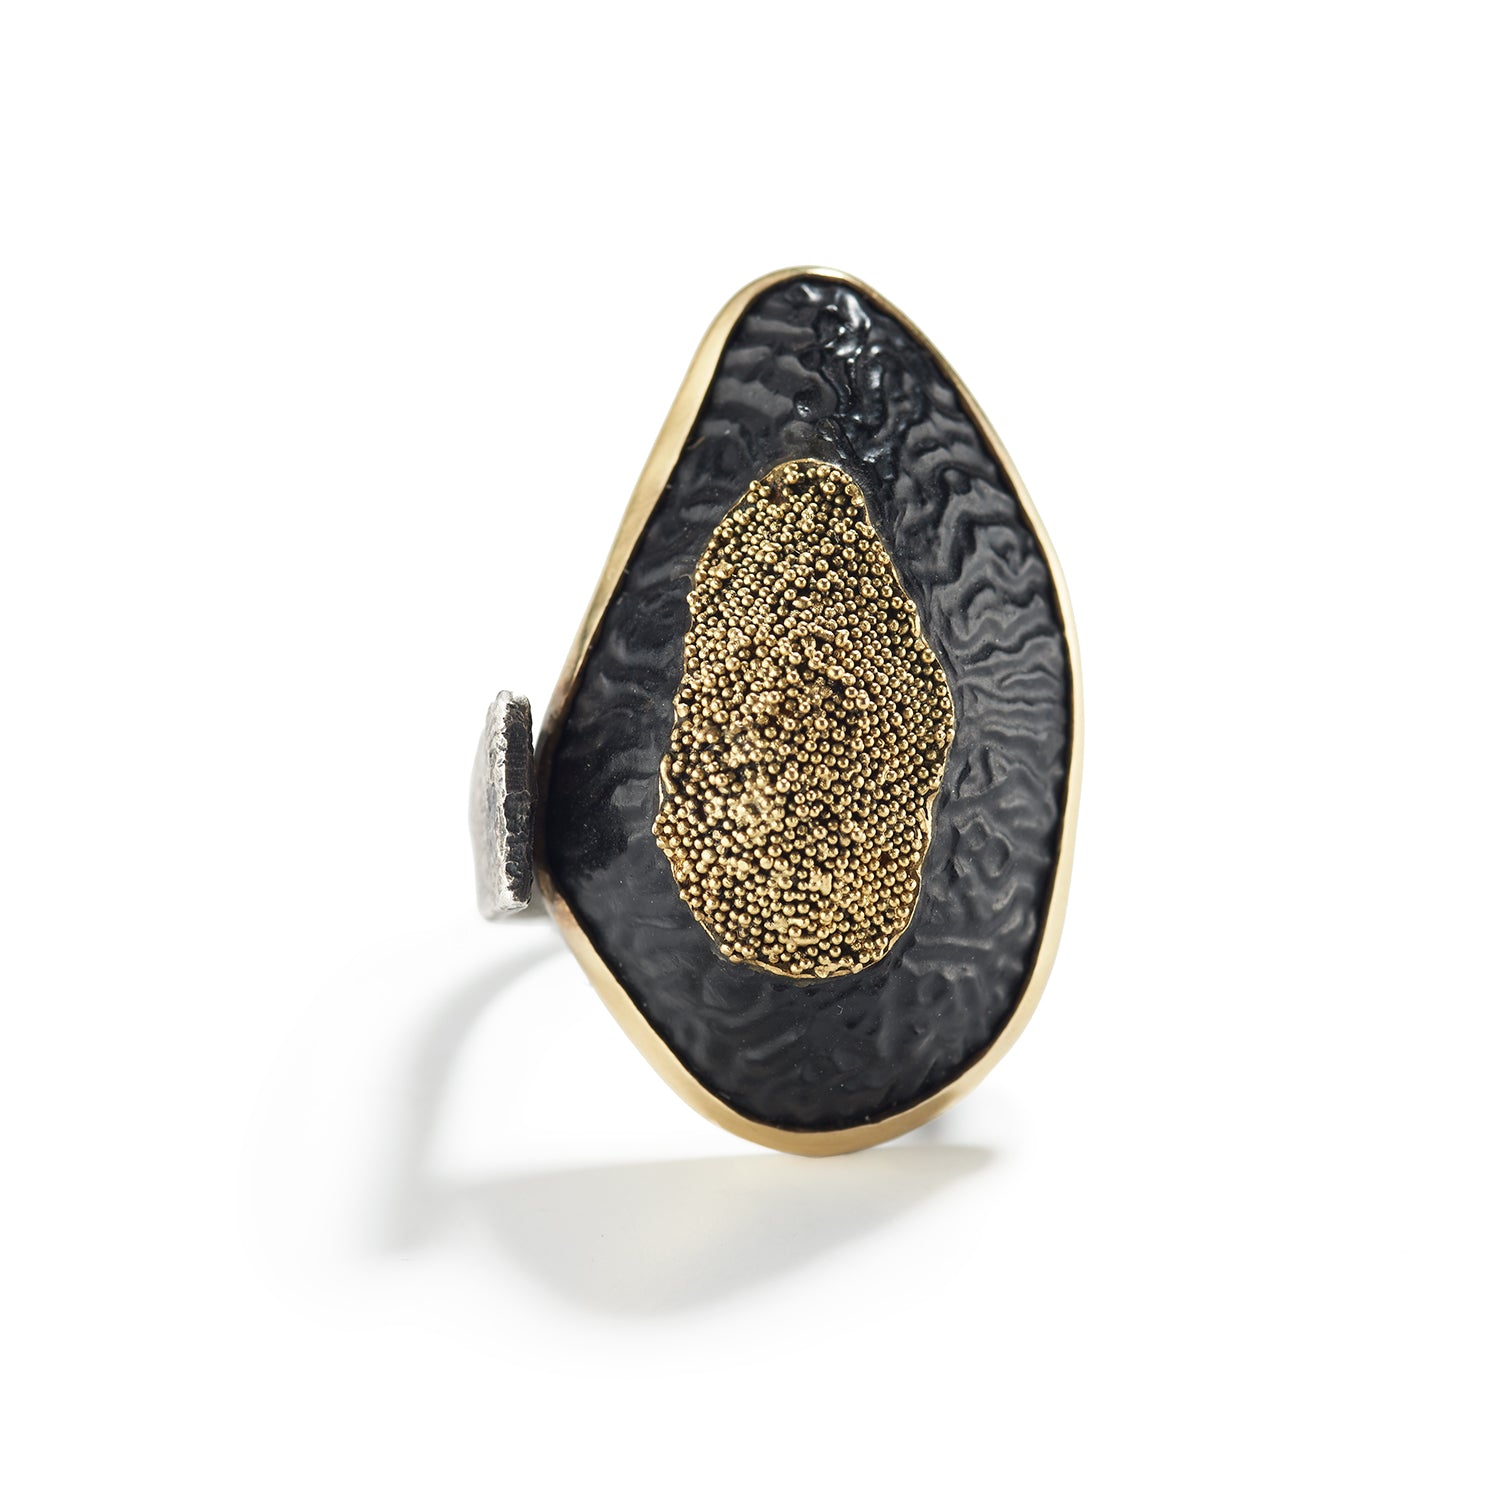 Borneo Beach Pebble and Gold Ring